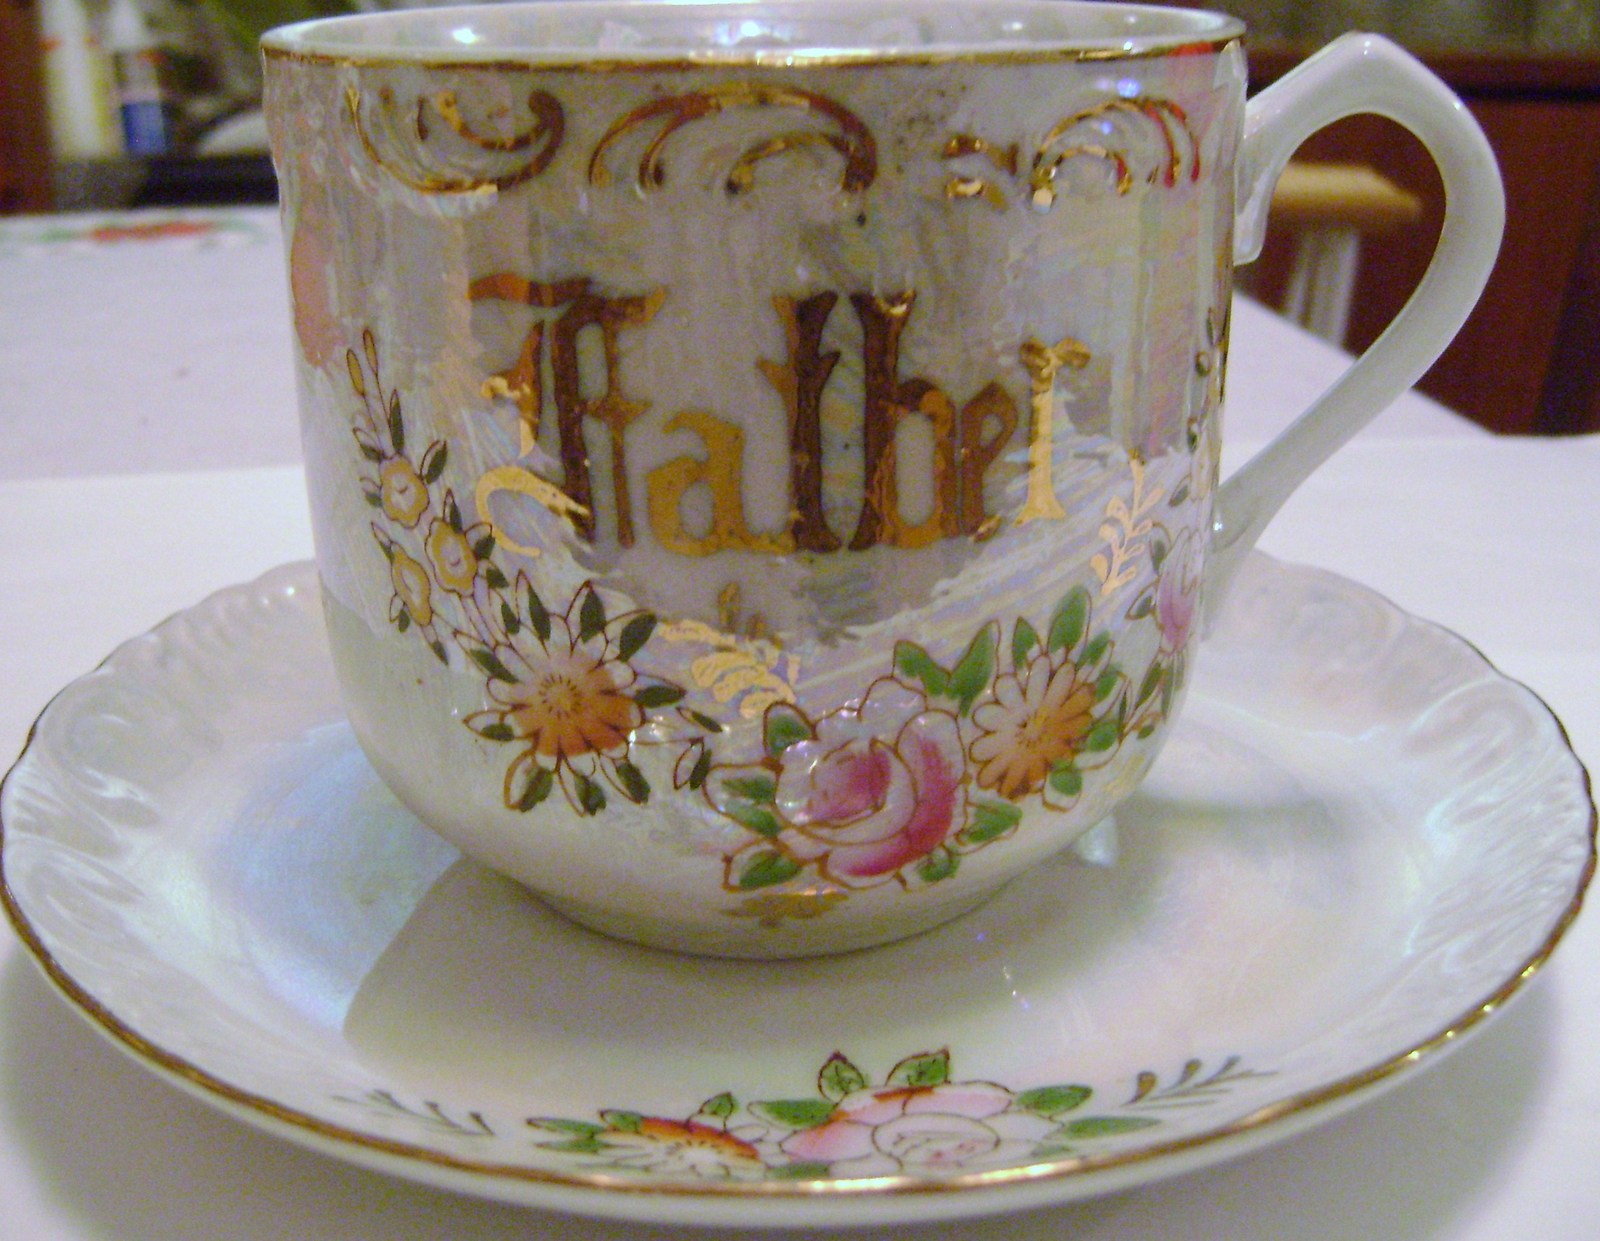 Large Luster Ware Father Cup and Saucer Set - $18.00